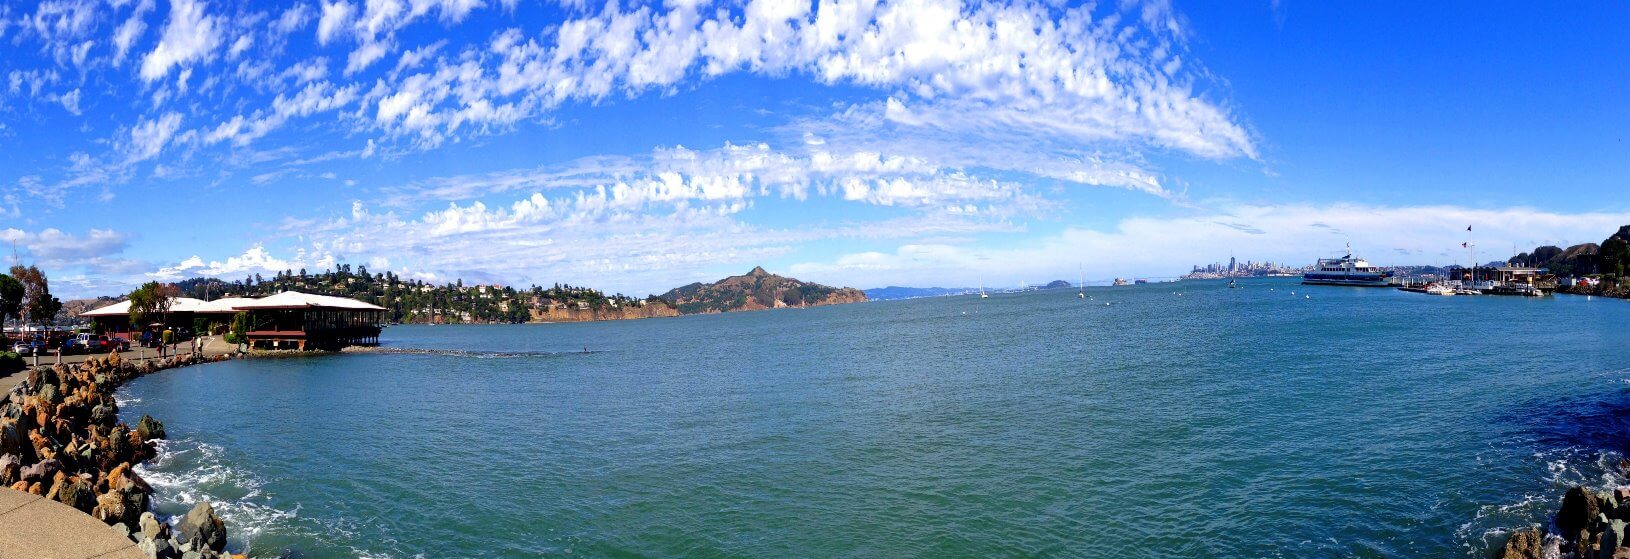 things_to_do_in_sausalito_ferry_cruise_boat_tours_from_san_francisco